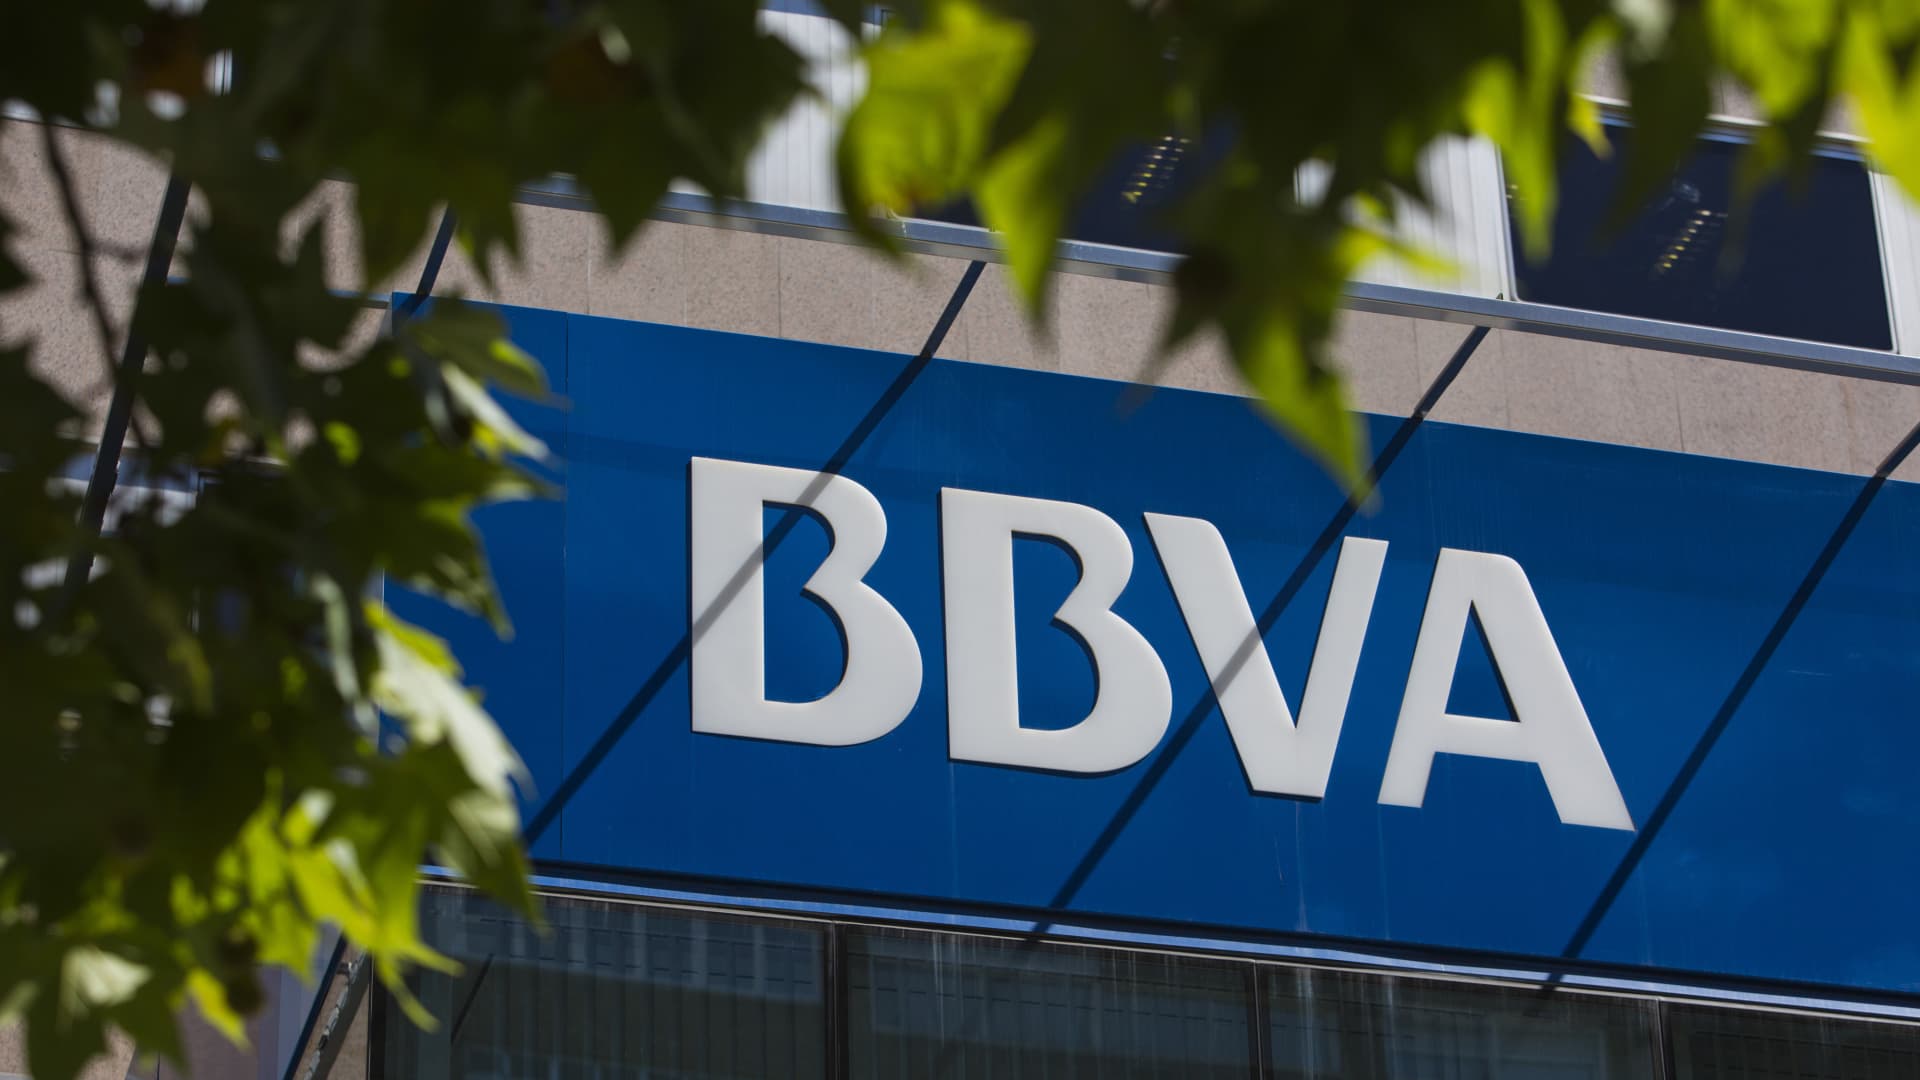 Spain's BBVA launches a rare hostile takeover bid for rival Sabadell